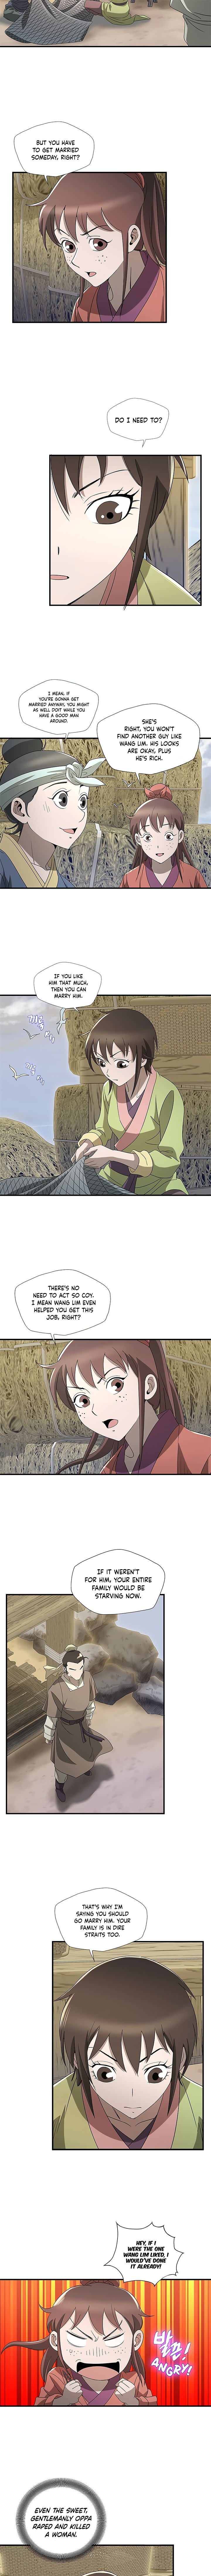 Strong Gale, Mad Dragon - Page 3